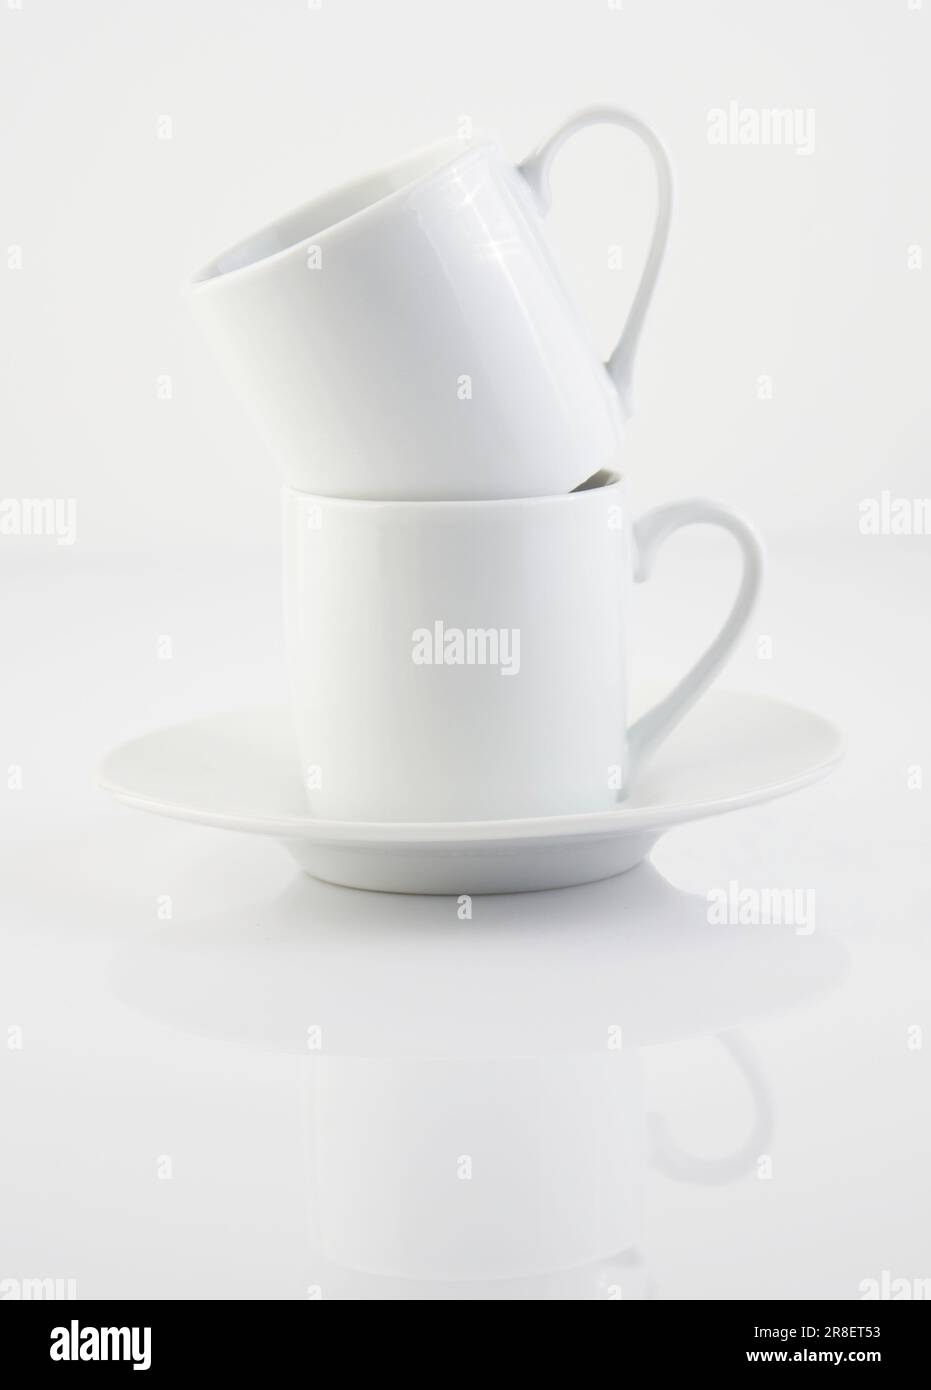 https://c8.alamy.com/comp/2R8ET53/two-white-cups-and-saucers-are-arranged-on-a-stacked-white-surface-2R8ET53.jpg